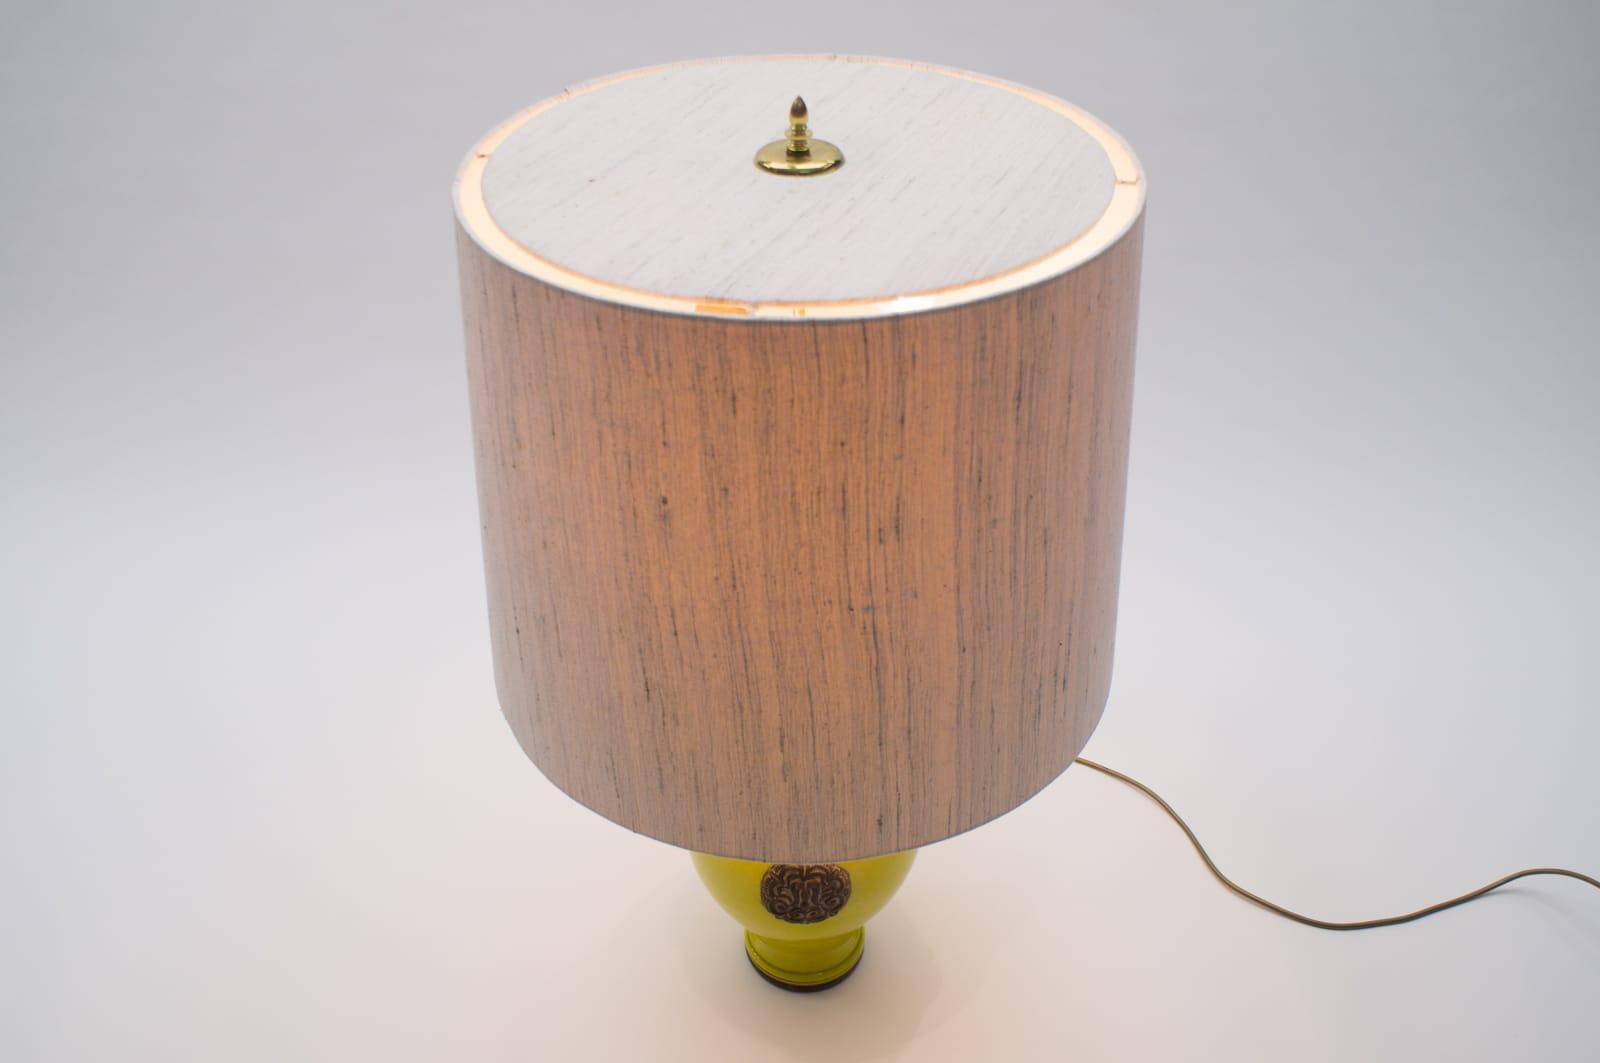 Oatmeal and Yellow Gilt Glazed Ceramic Table Lamp by Ugo Zaccagnini, Italy 1960s (Mitte des 20. Jahrhunderts) im Angebot